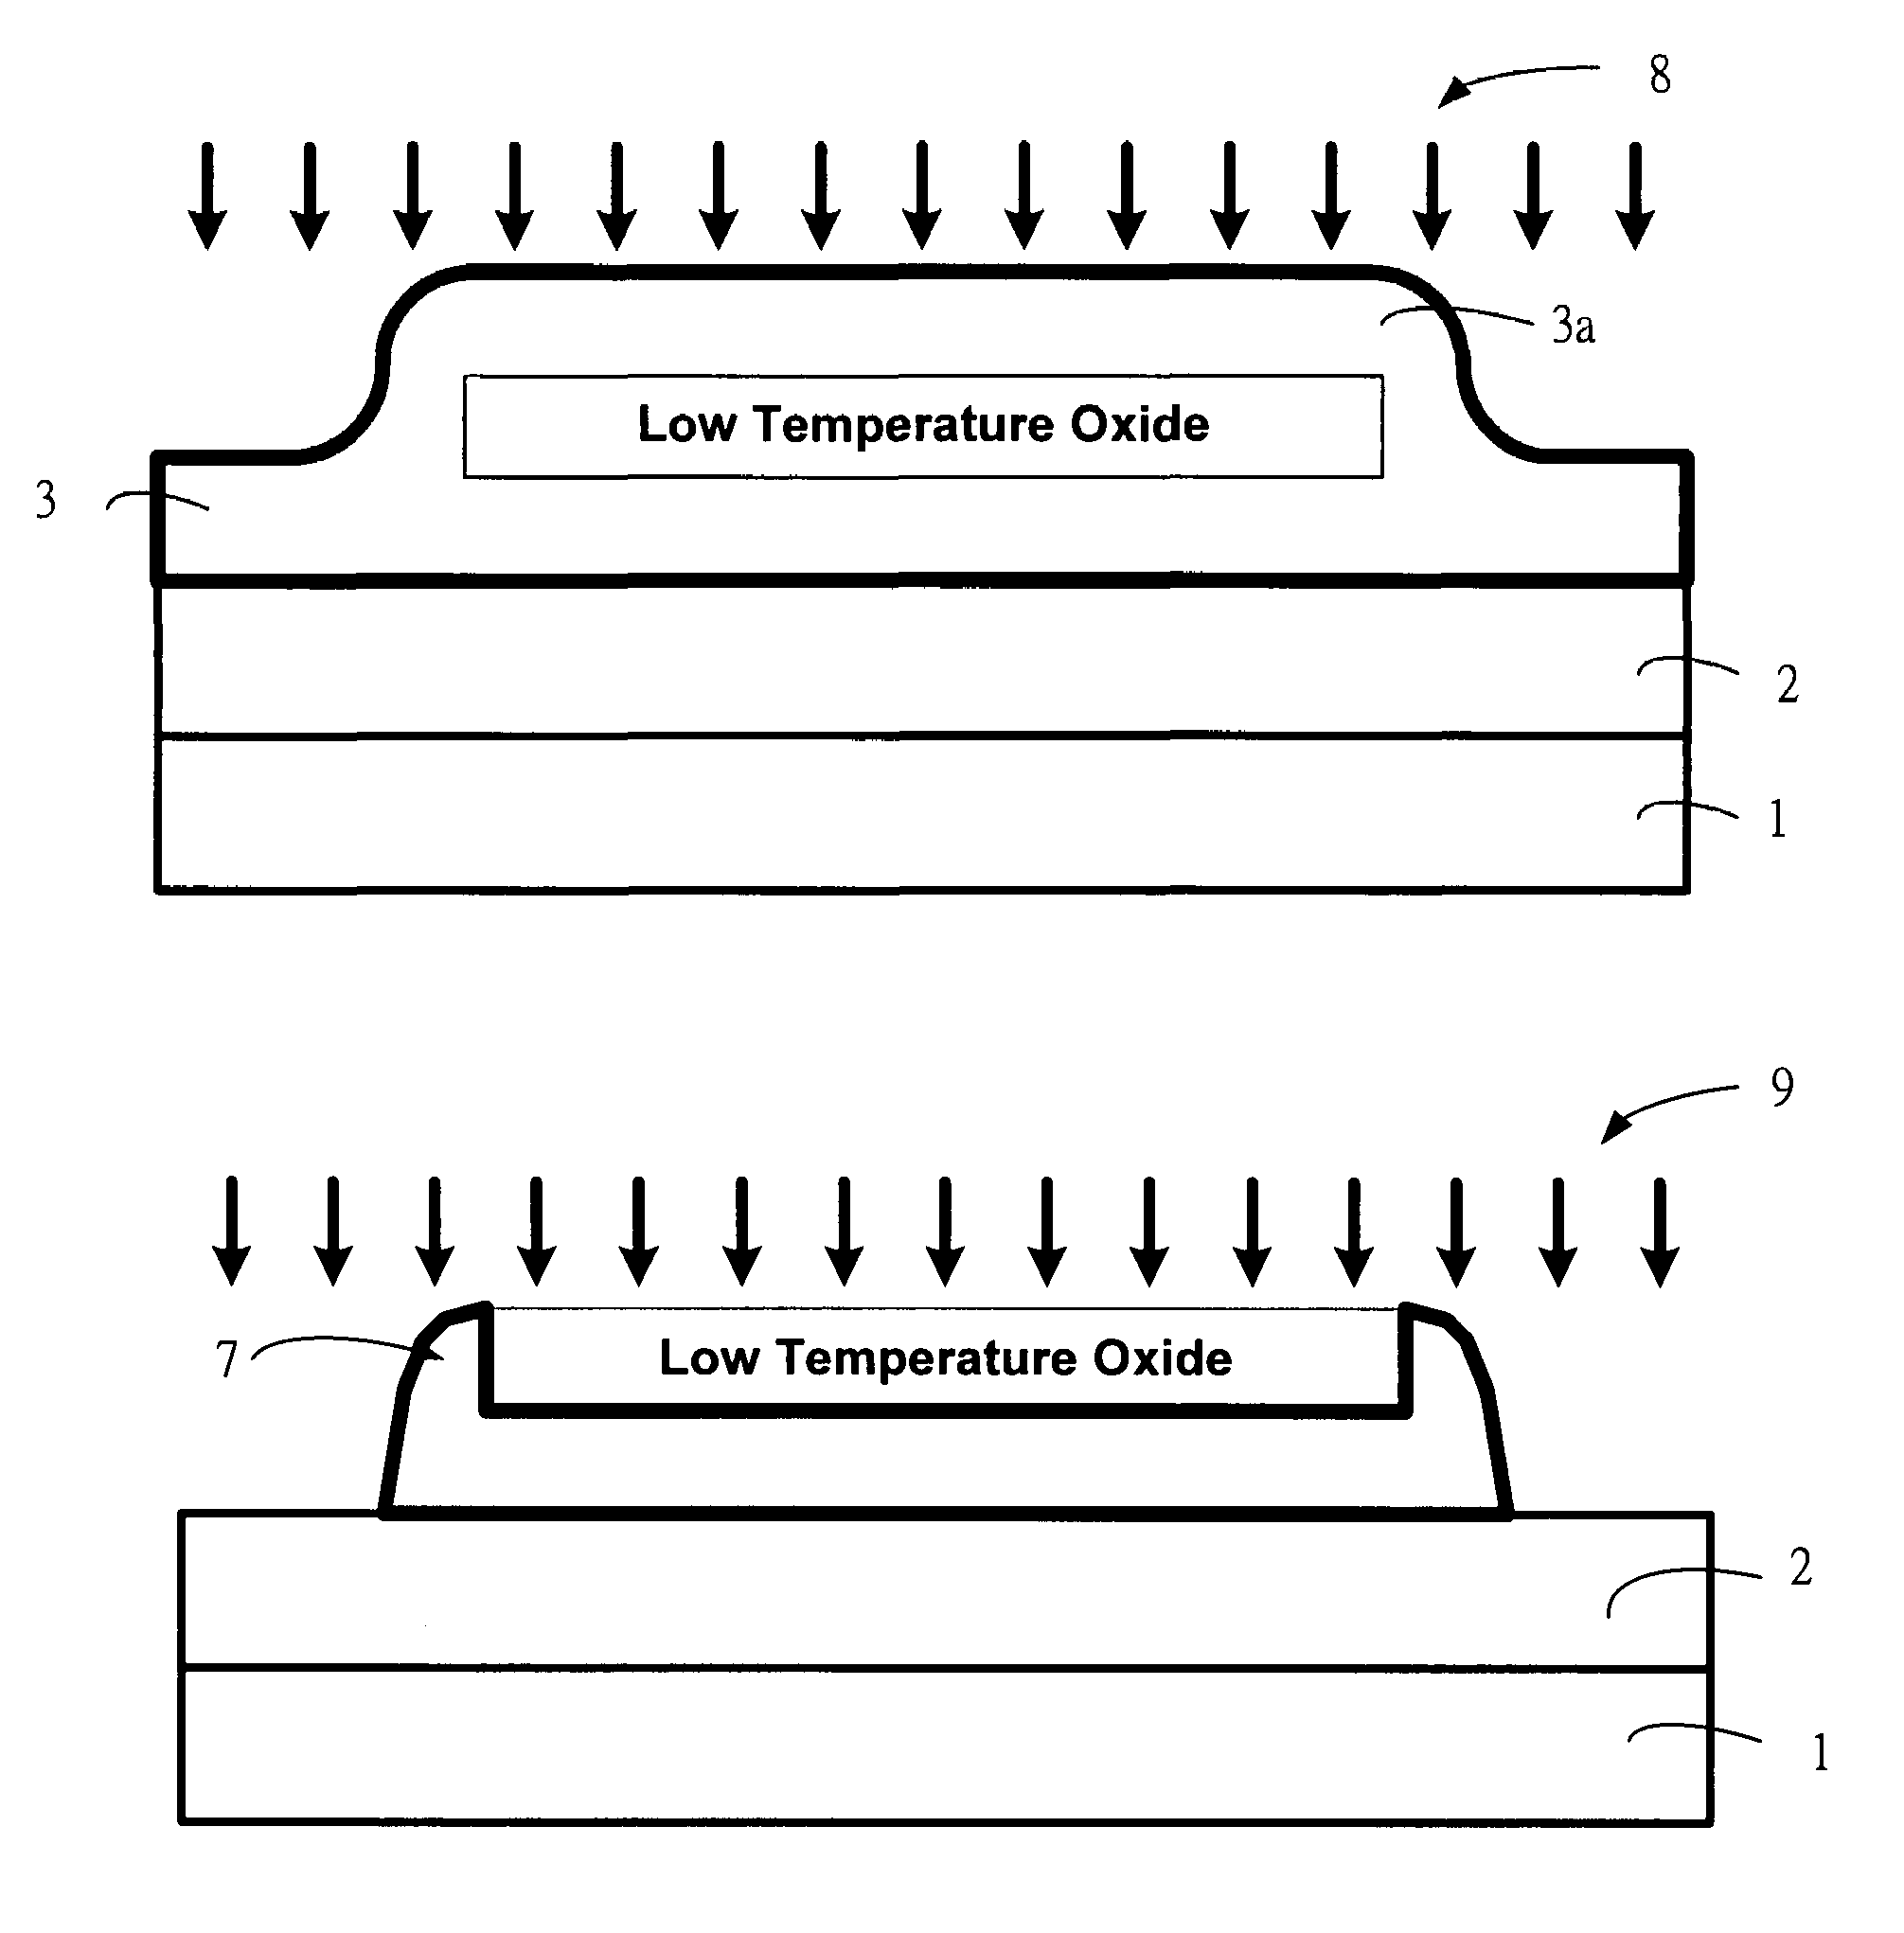 Method for fabrication of polycrystalline silicon thin film transistors